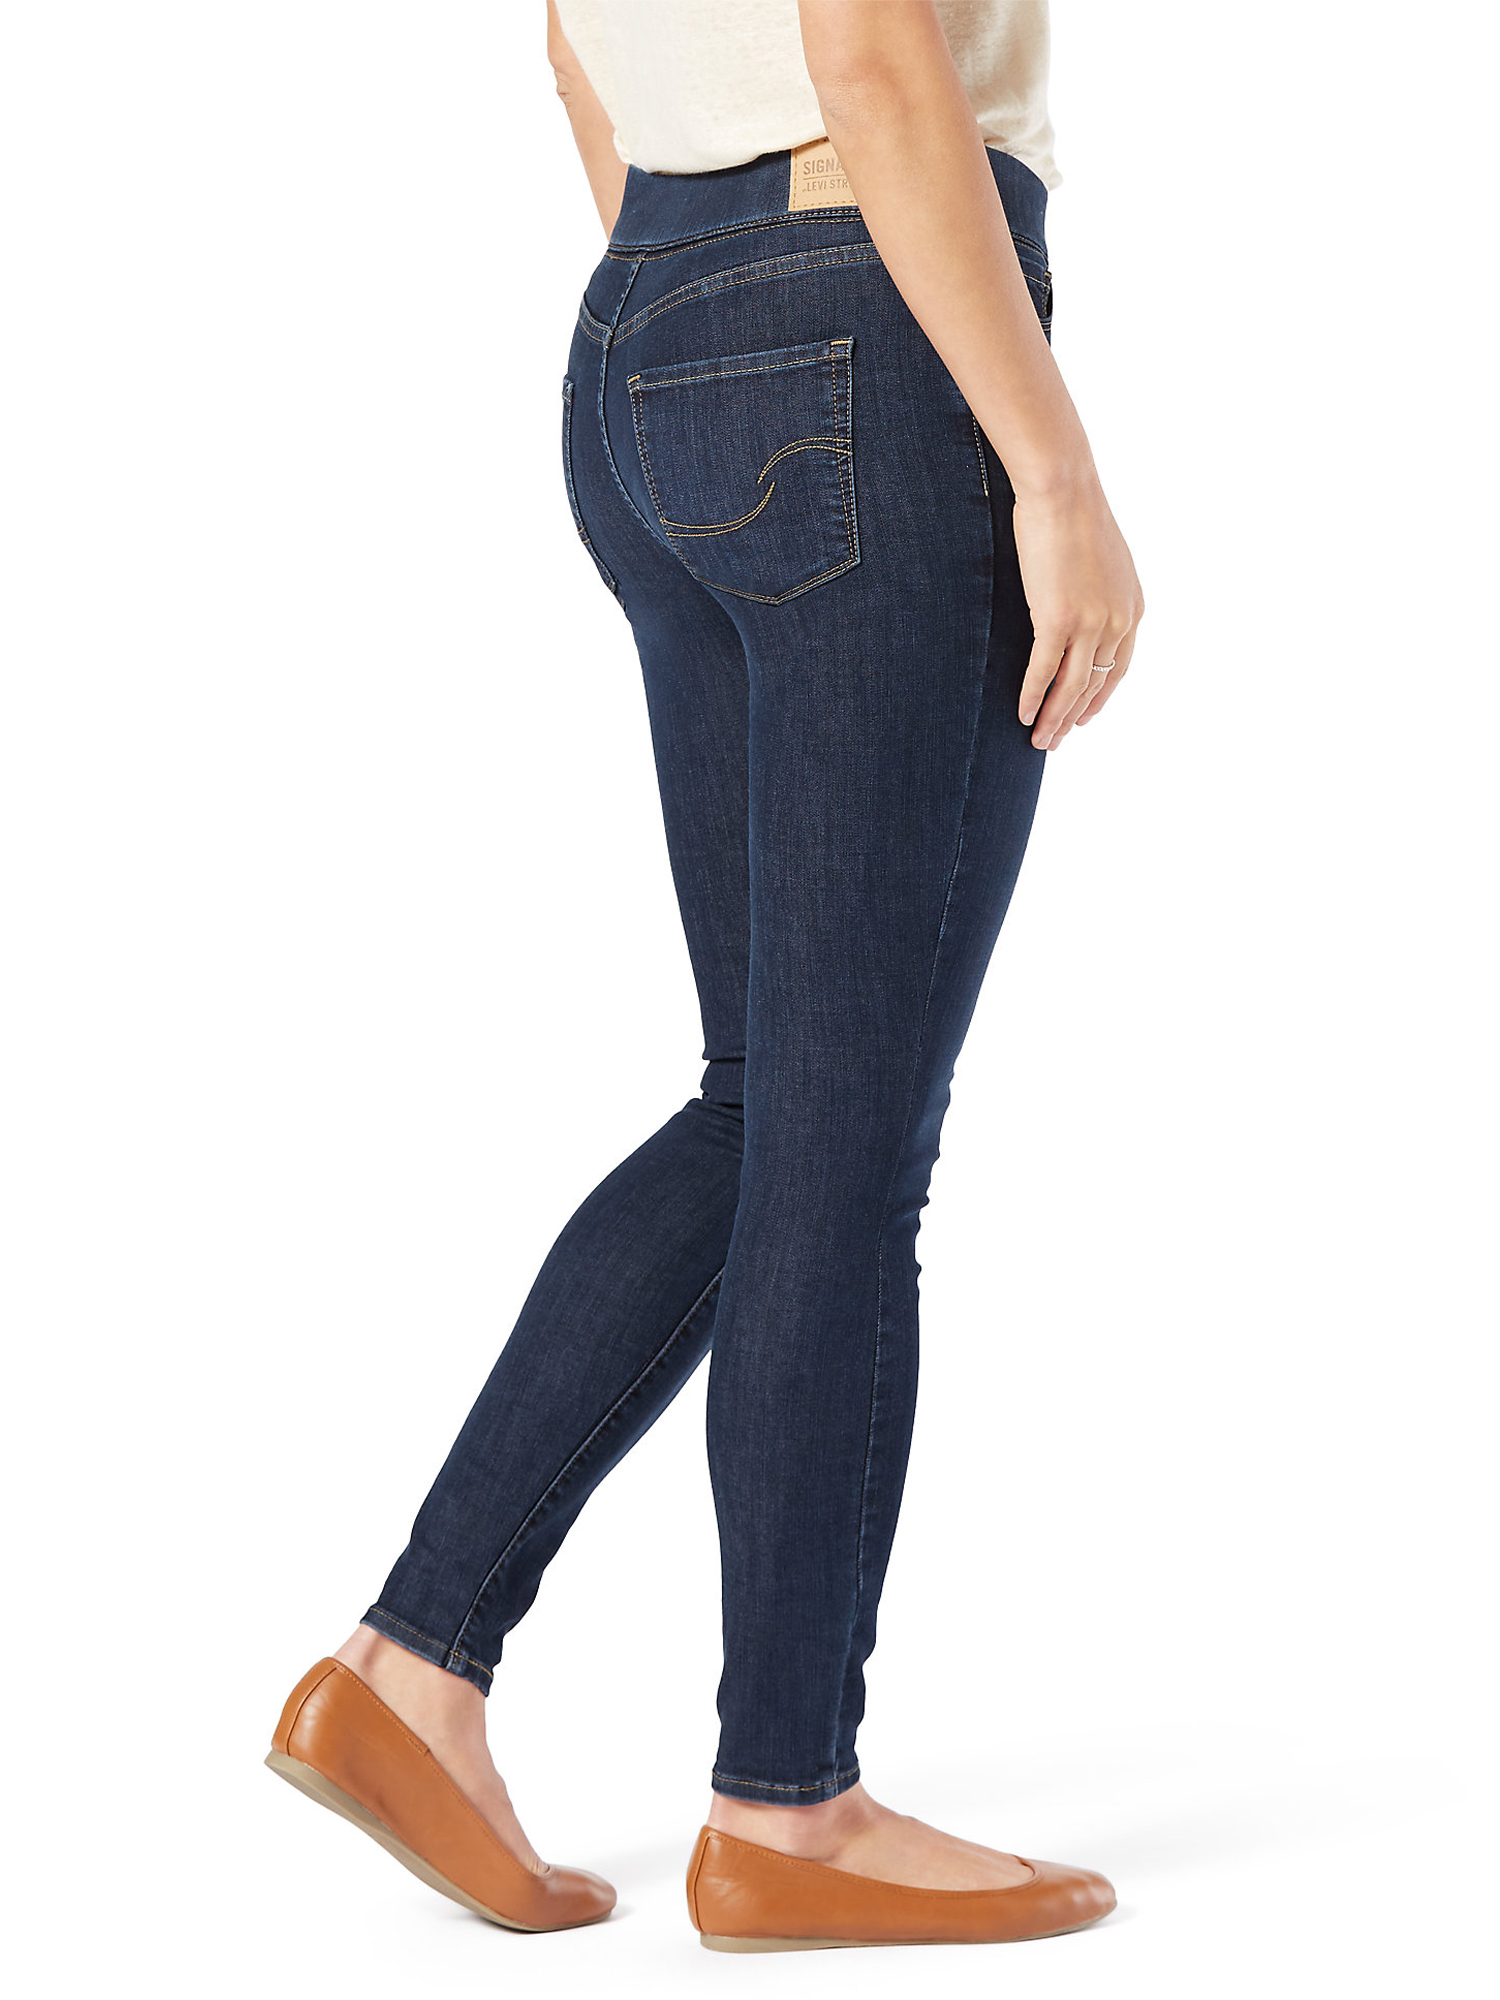 Signature by Levi Strauss & Co. Women's Simply Stretch Shaping Pull-On Super Skinny Jeans - image 3 of 6